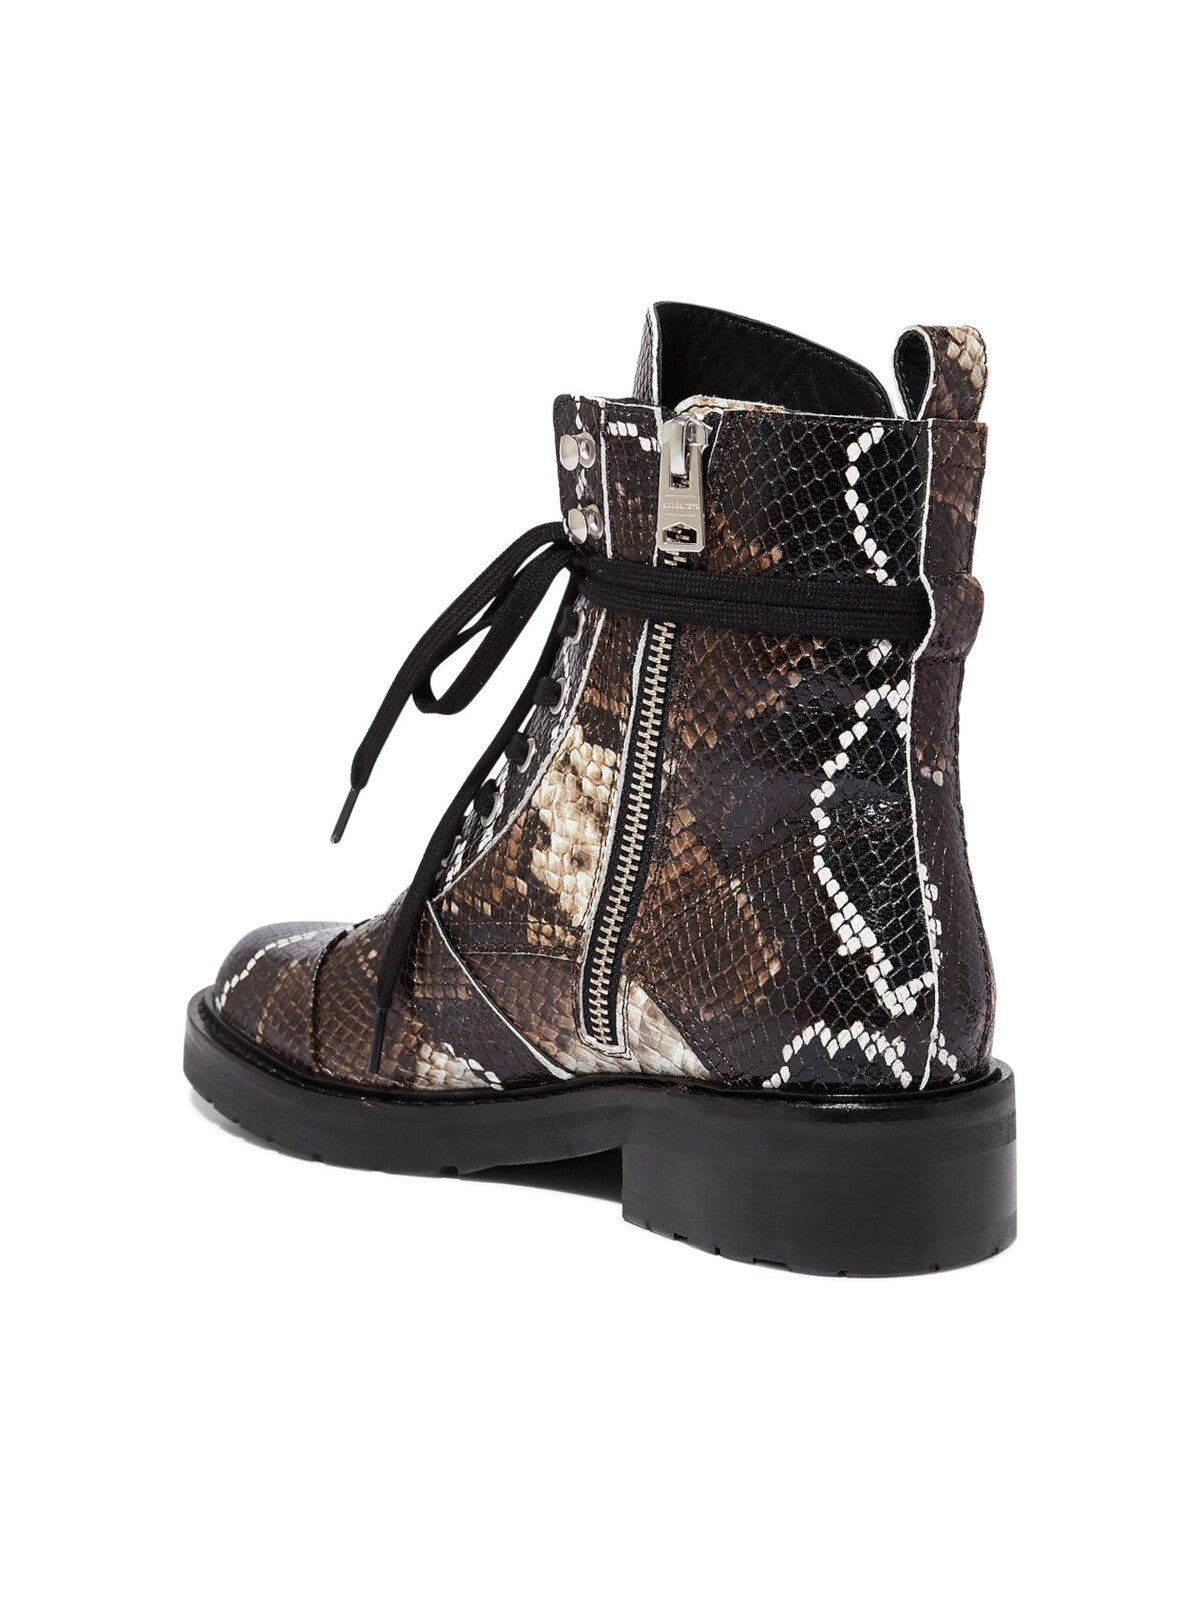 ALLSAINTS Womens Black Snakeskin 1/2" Platform Metallic Accents Lace-Up Removable Insole Buckle Accent Padded Donita Round Toe Block Heel Zip-Up Combat Boots